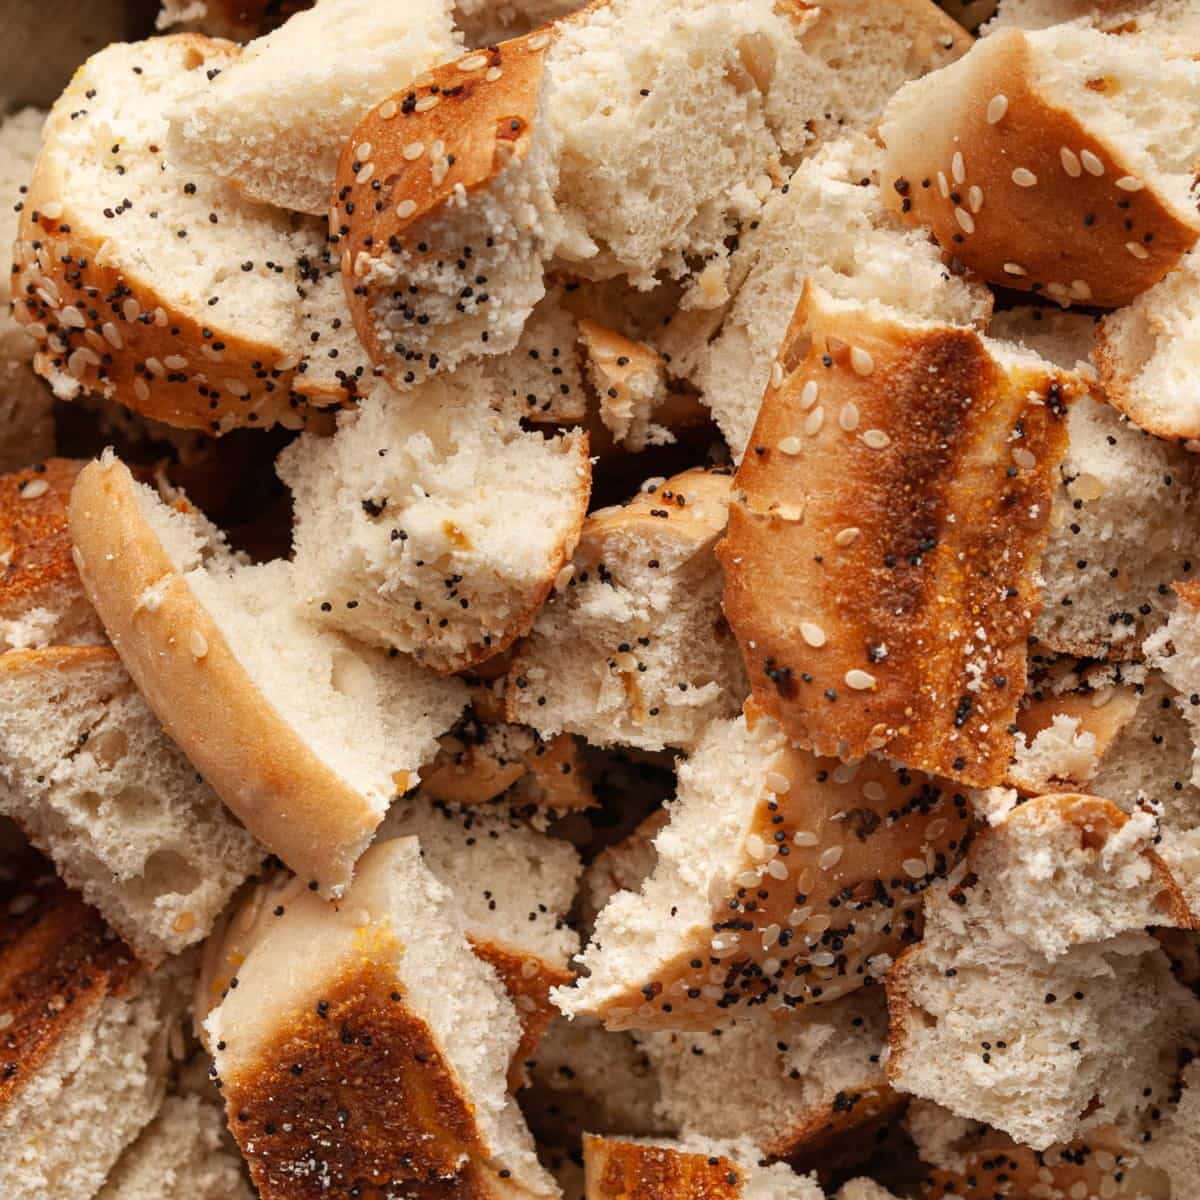 a close up of cubed slightly stale bread